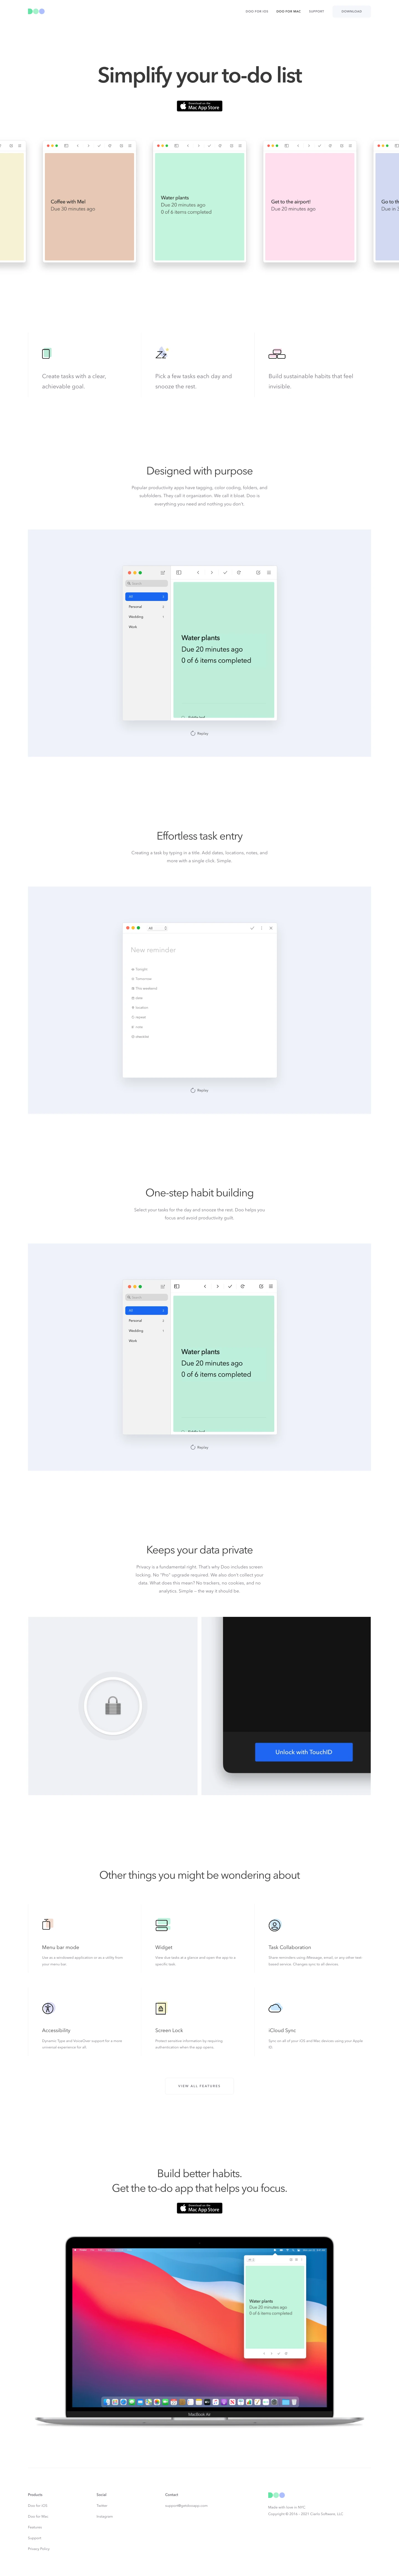 Doo Landing Page Example: Build better habits and make progress each day with a to-do app designed to help you focus. Download for iPhone, iPad, and Mac.